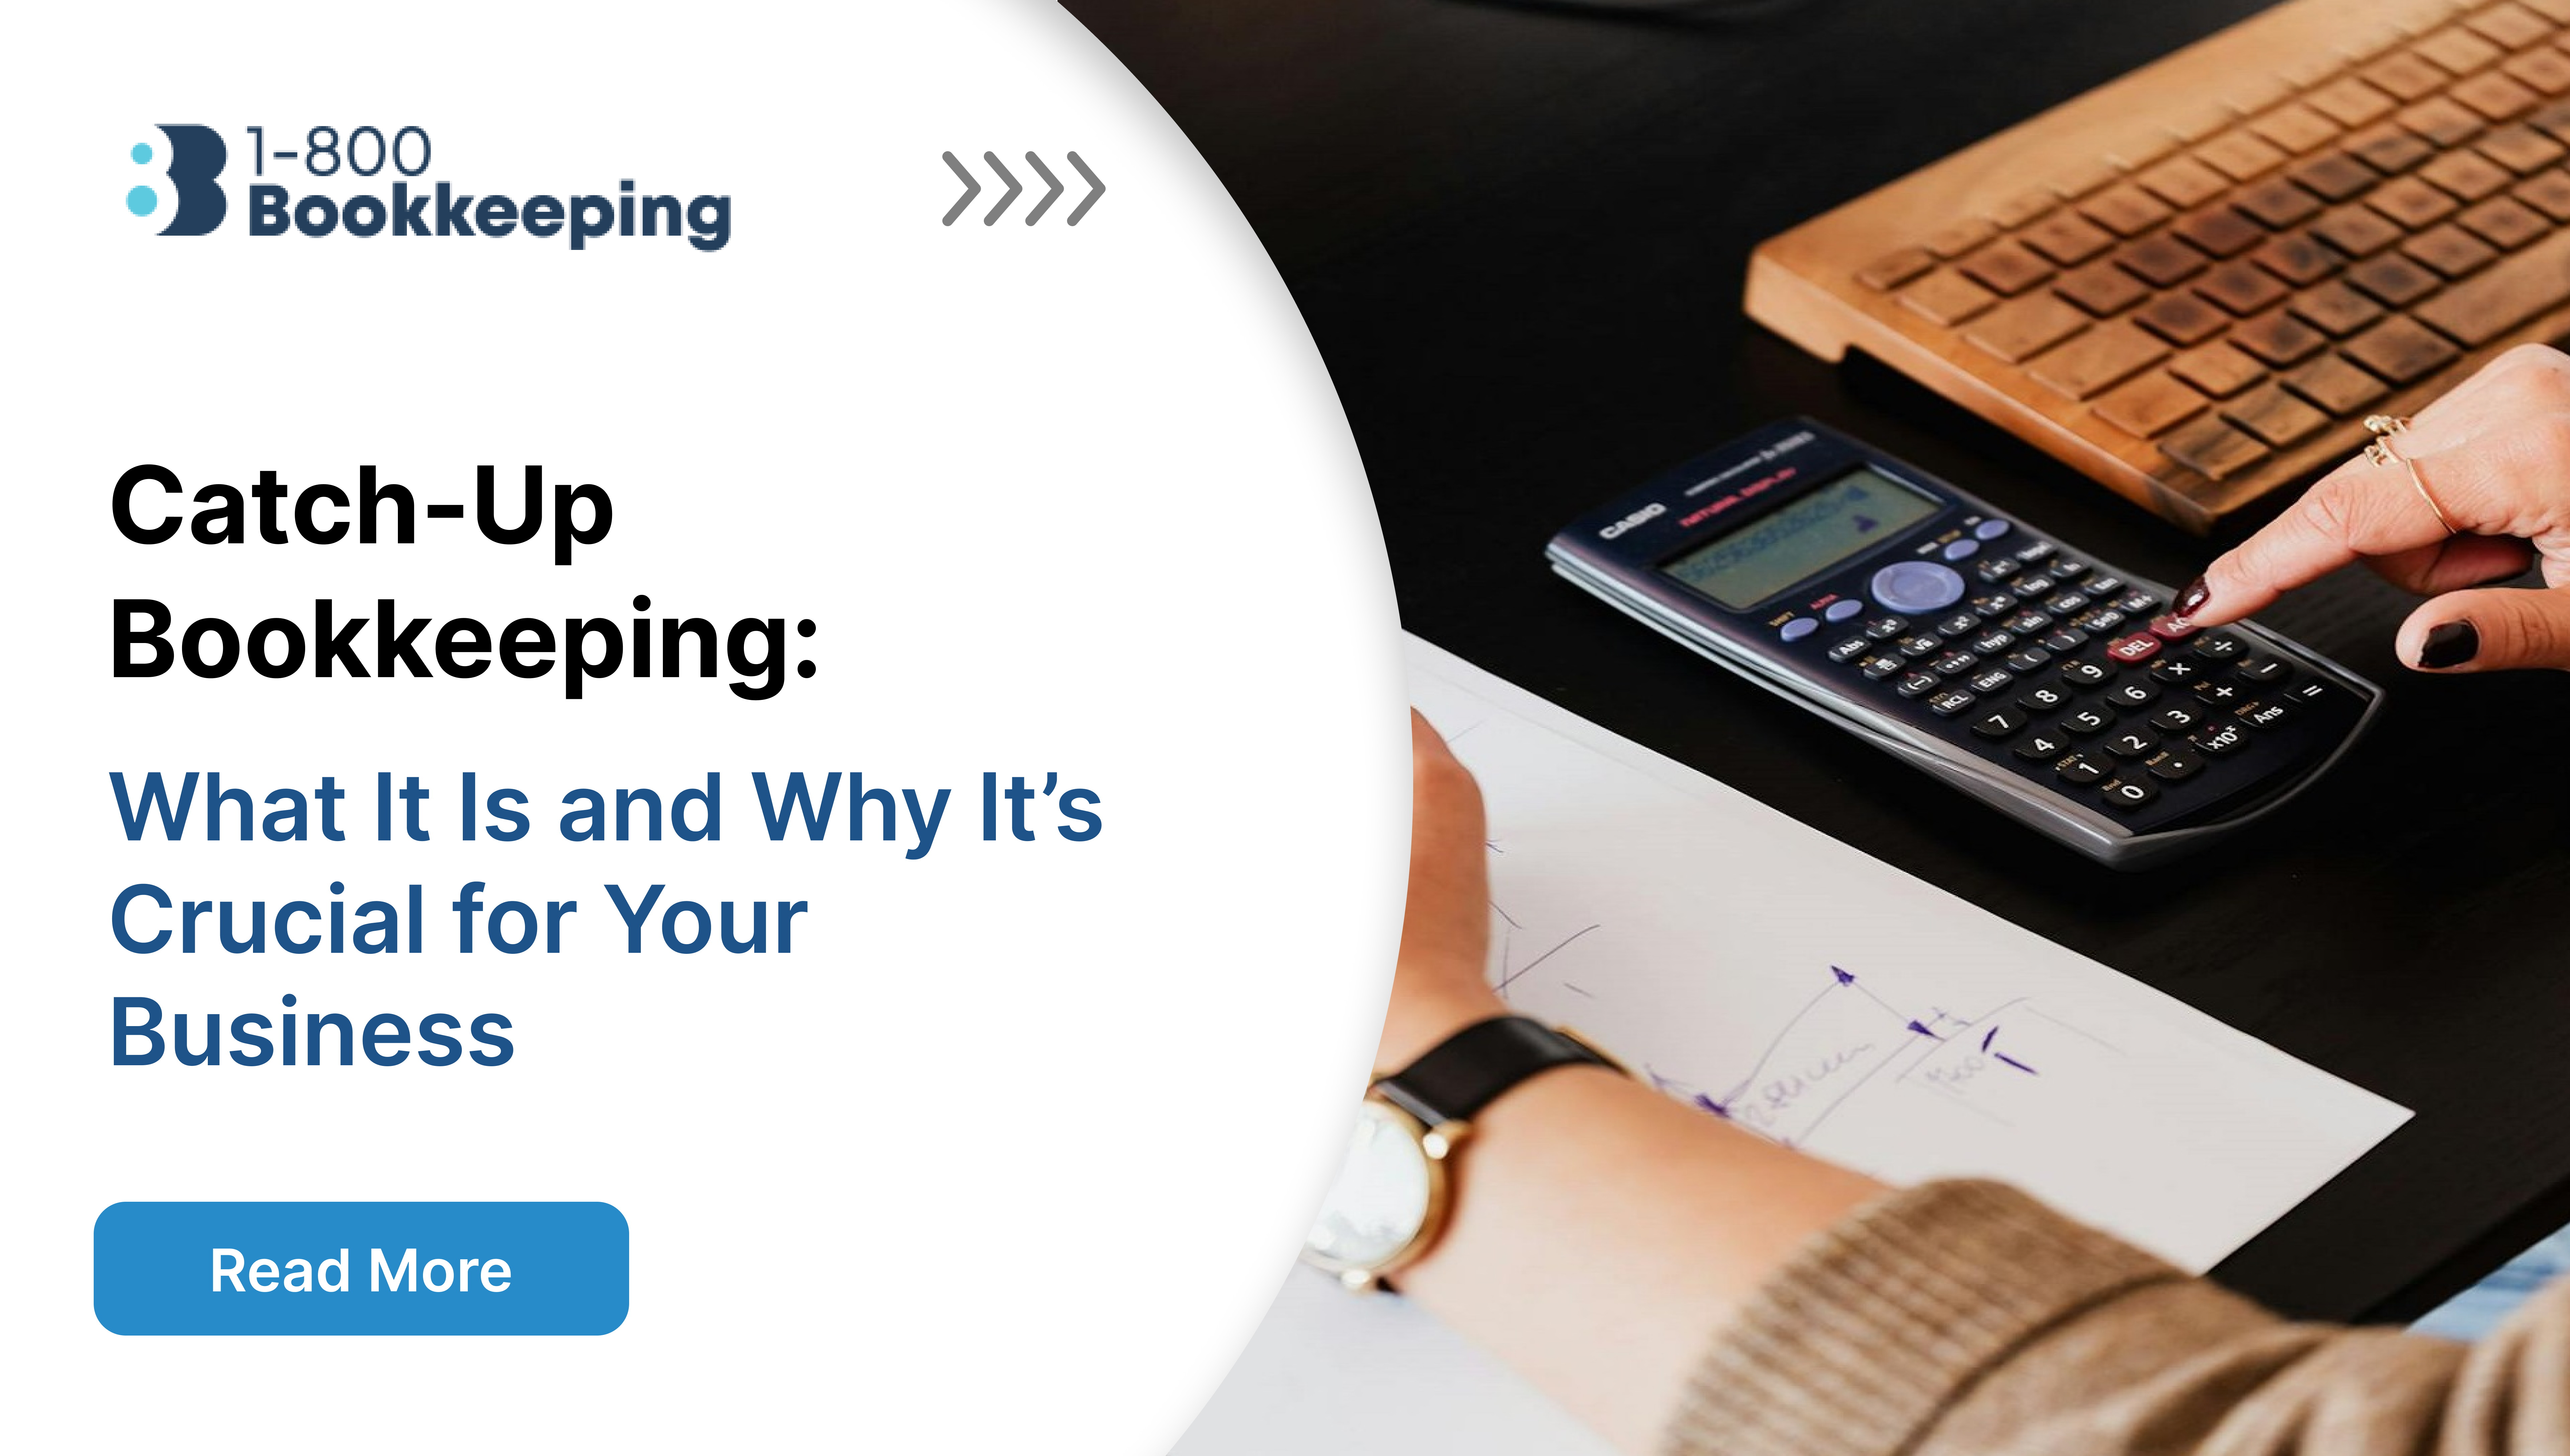 Catch-Up Bookkeeping: What It Is and Why It’s Crucial for Your Business